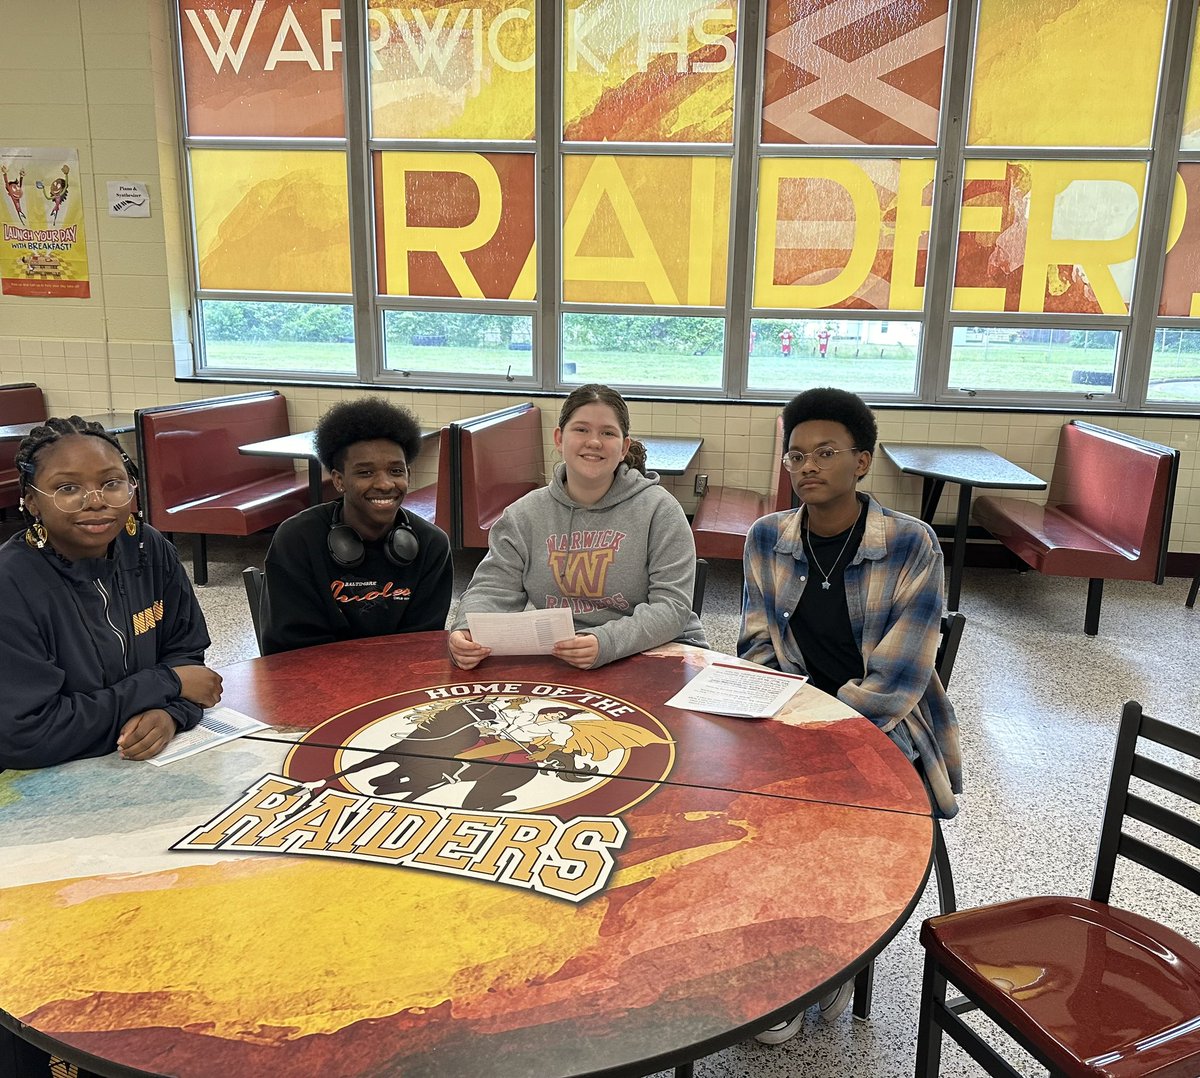 Final day of filming our “Welcome to @WarwickRaiders” mini 🎥 clips. Today’s piece even included a live Q&A from students at @BTWashingtonMS. Can’t wait to share the final cut! @Adkinson_NBCT @CMarcolini1